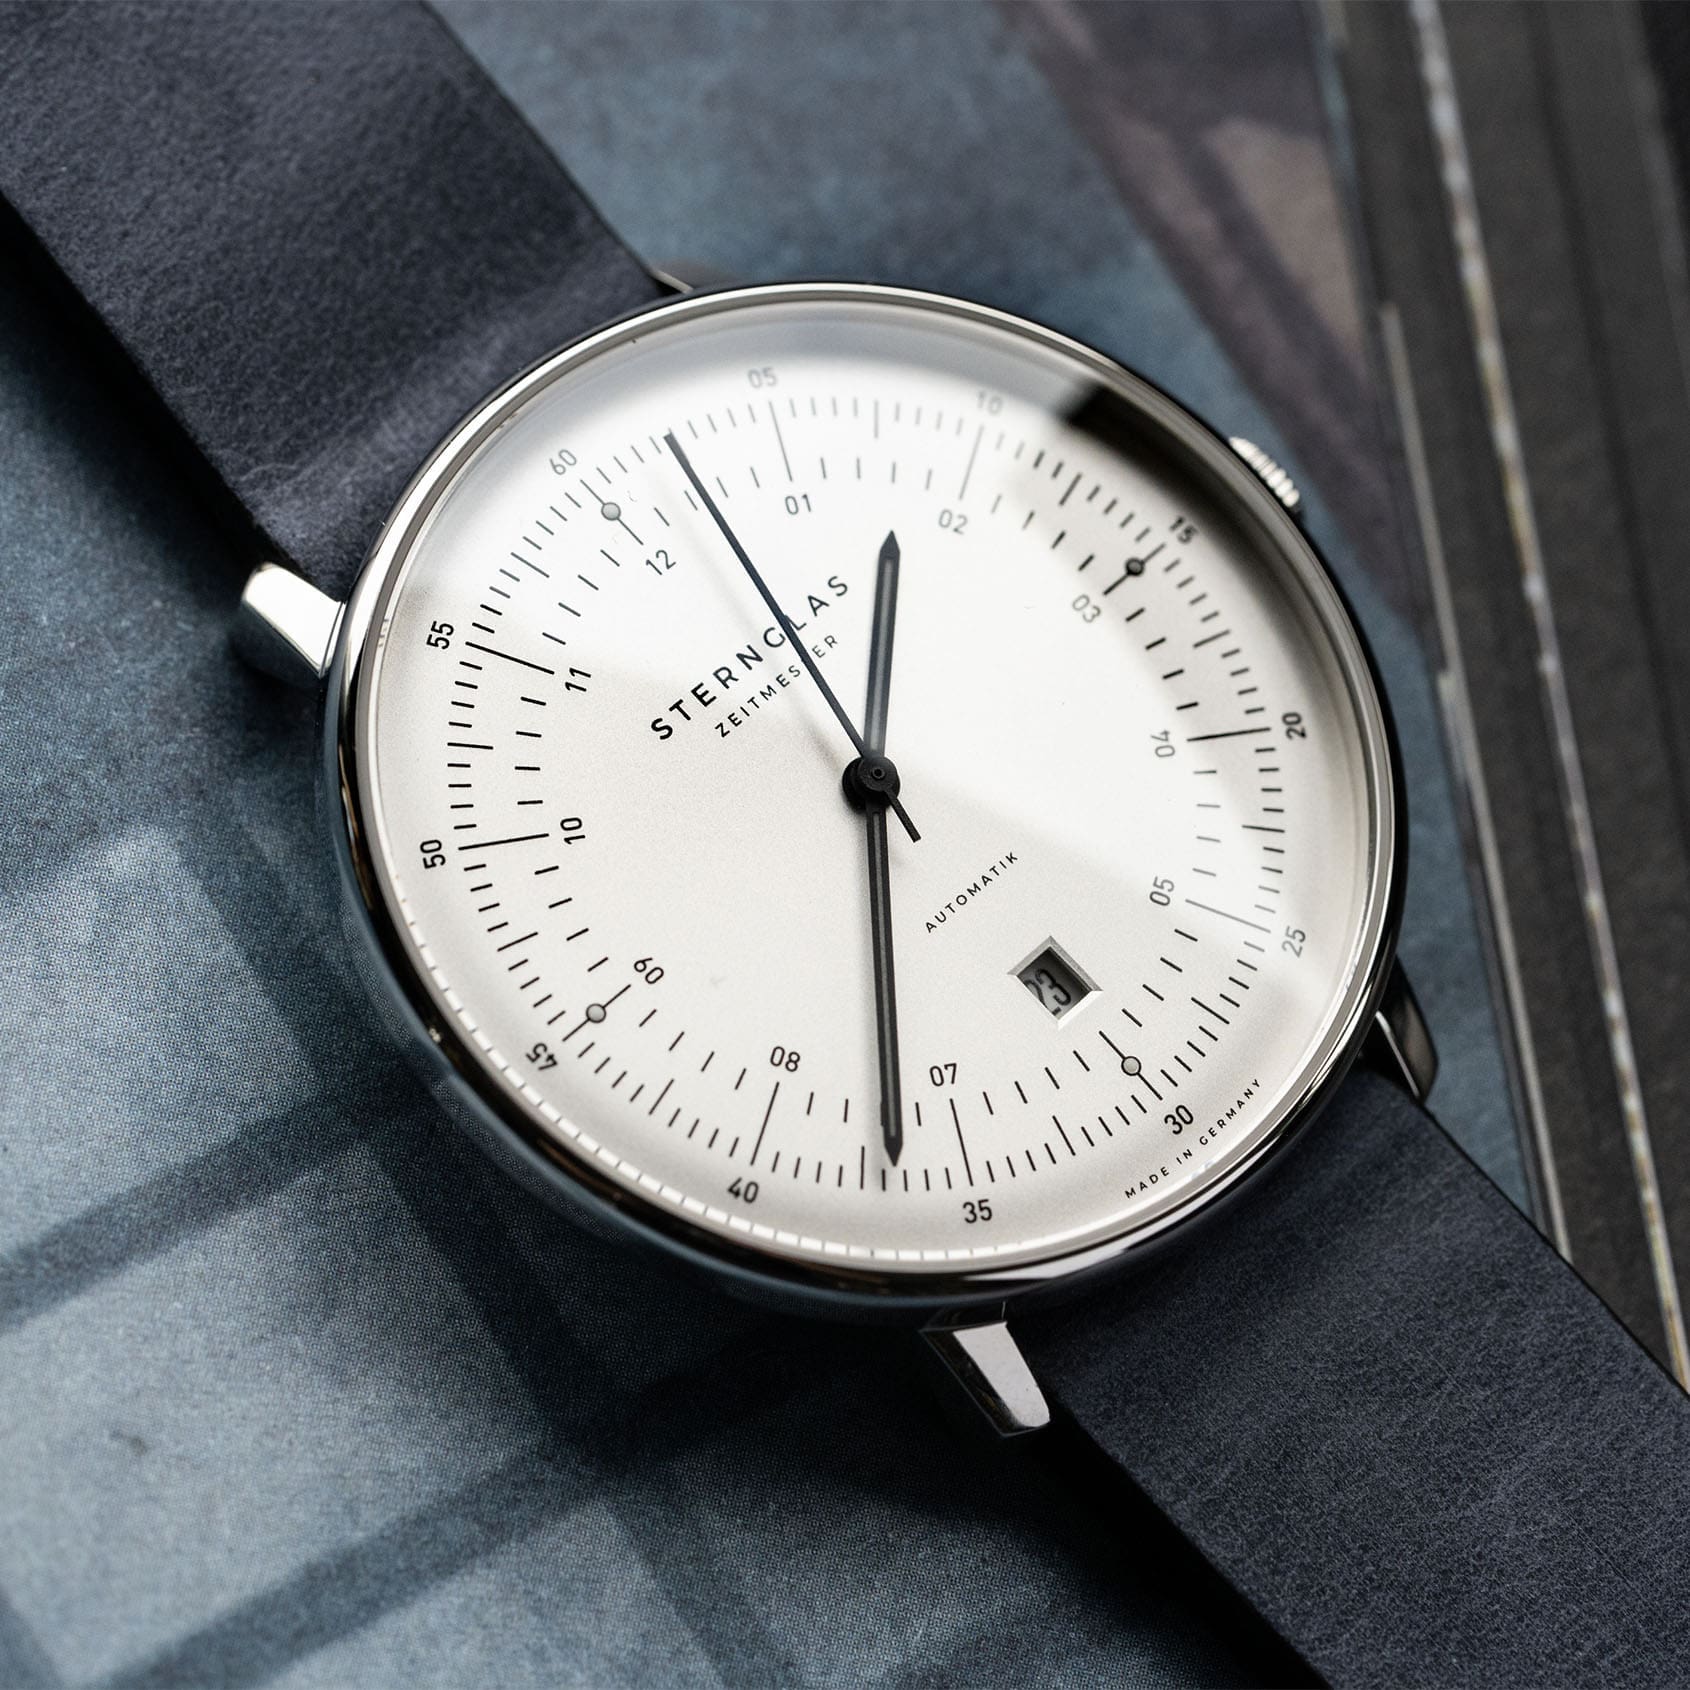 HANDS-ON: Form follows function in the Sternglas Hamburg Automatik